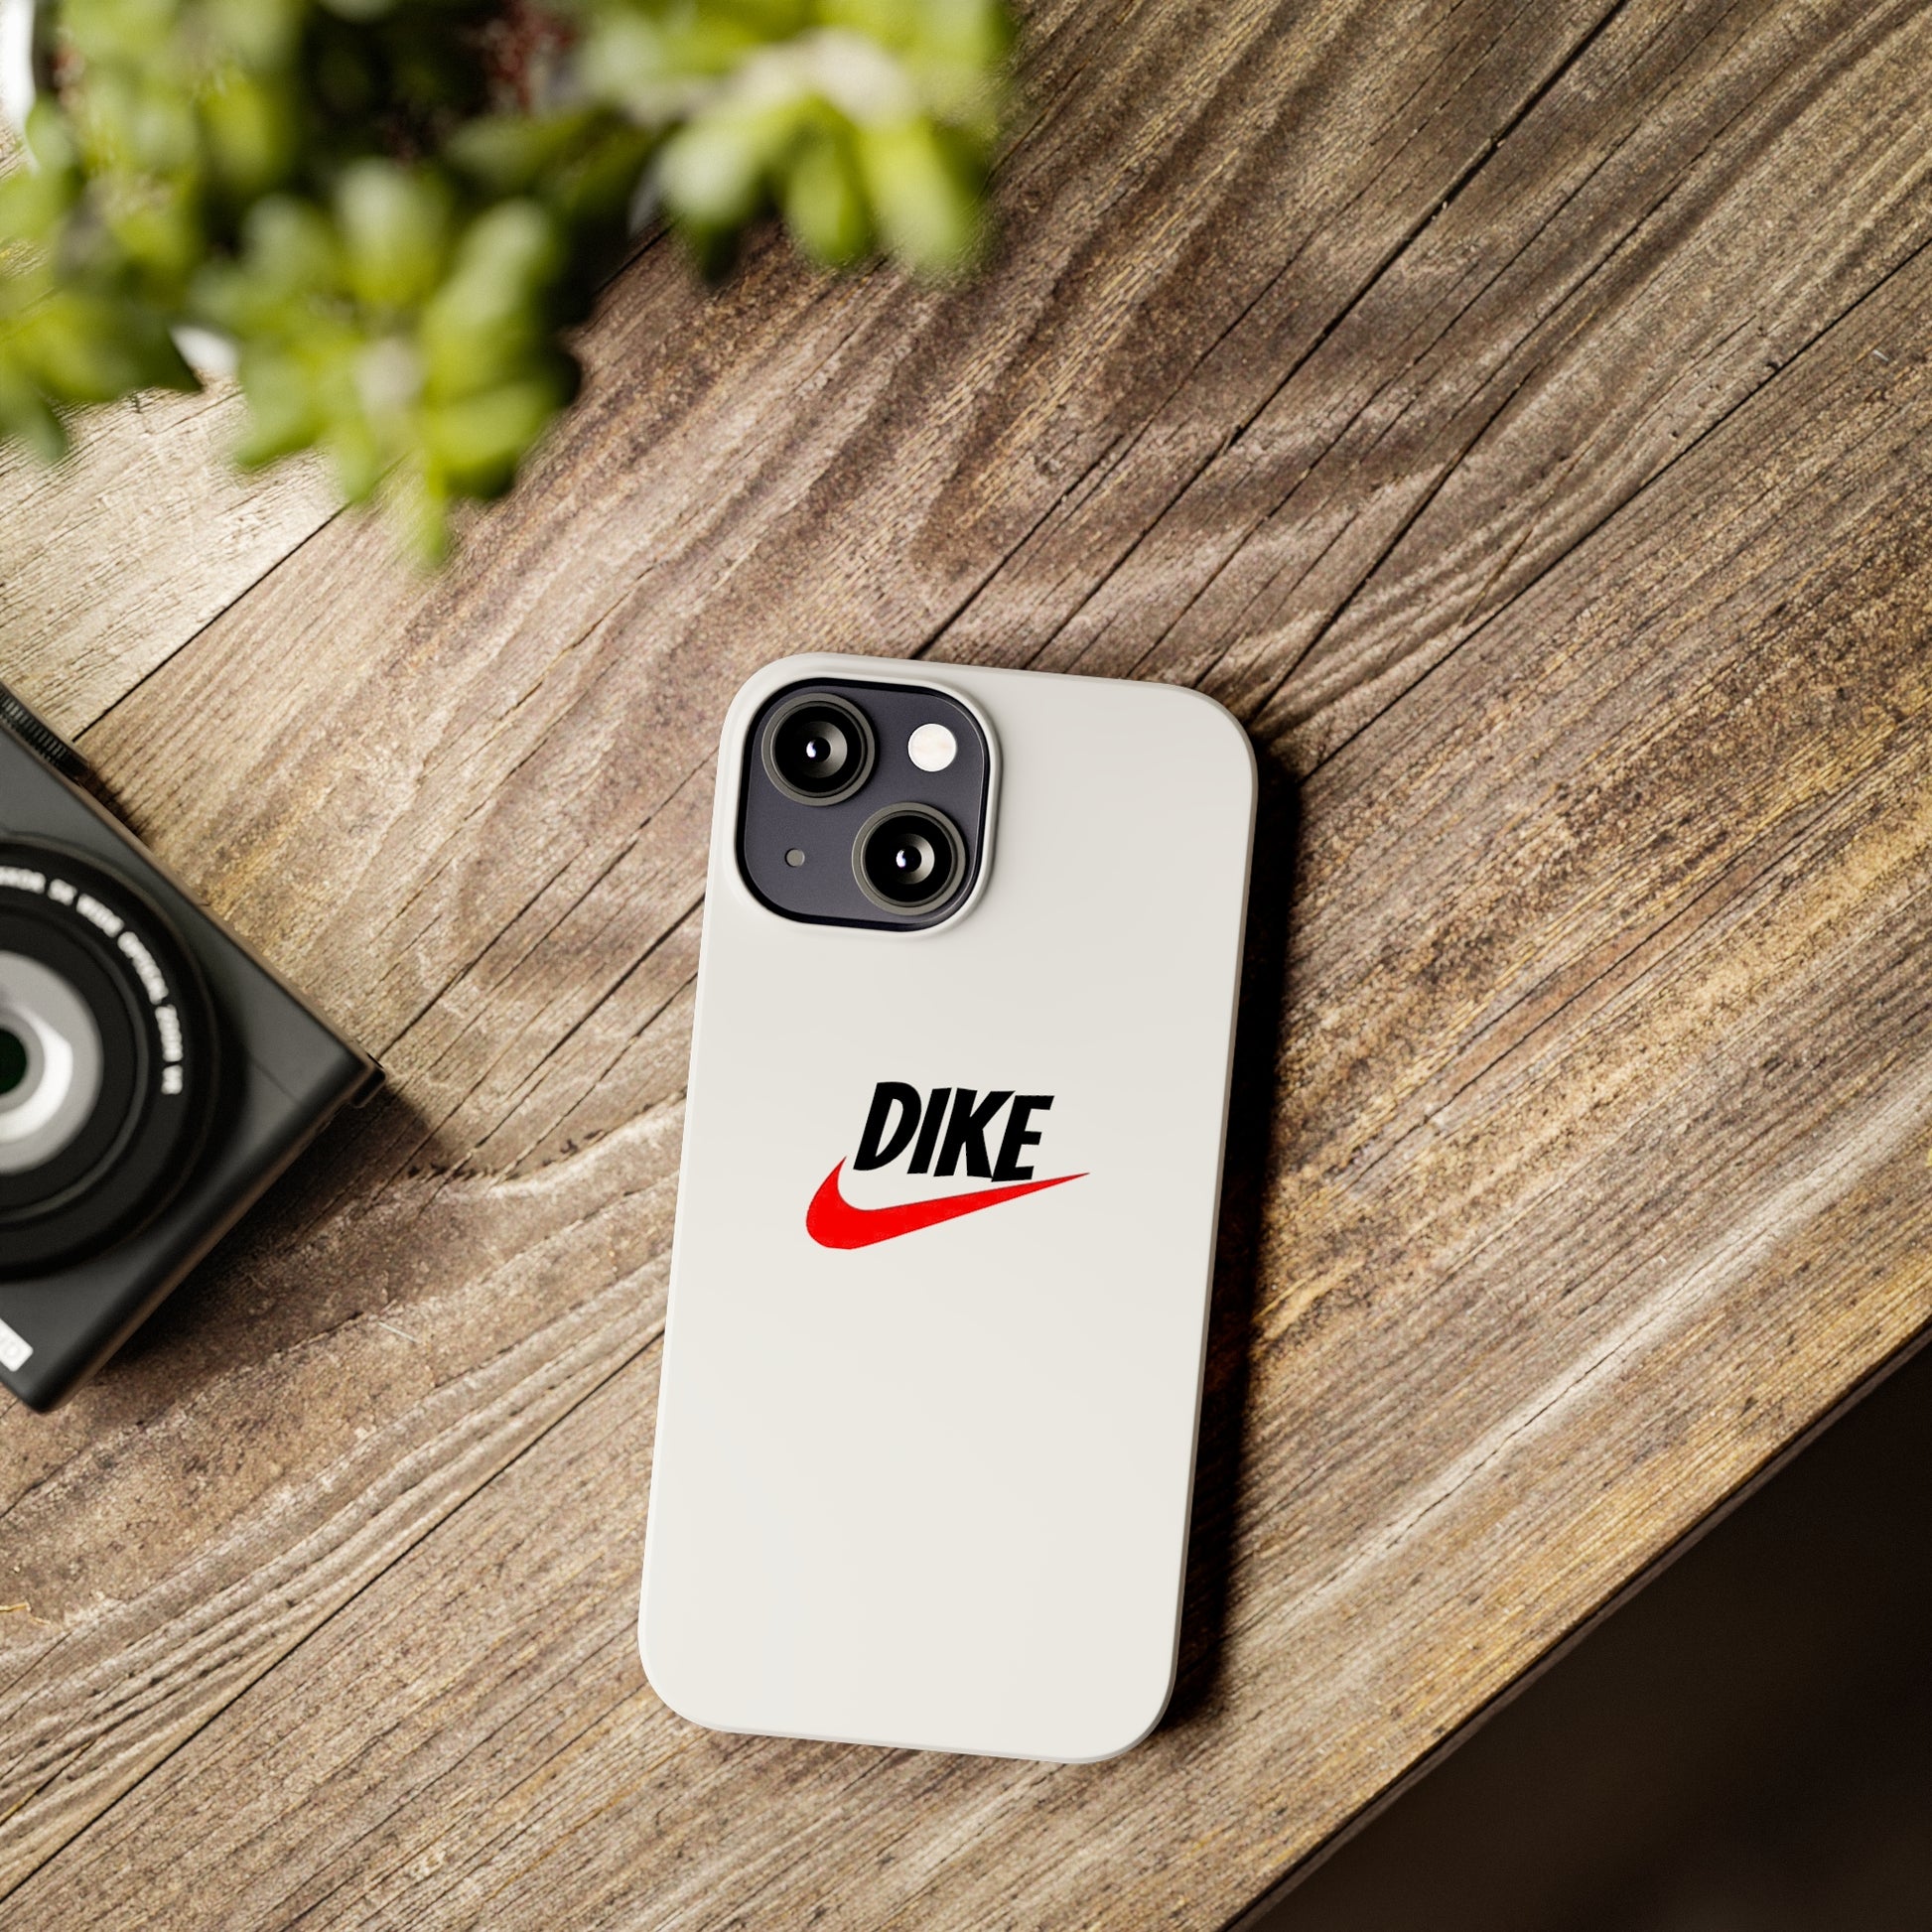 "Dike" MagStrong Phone Cases